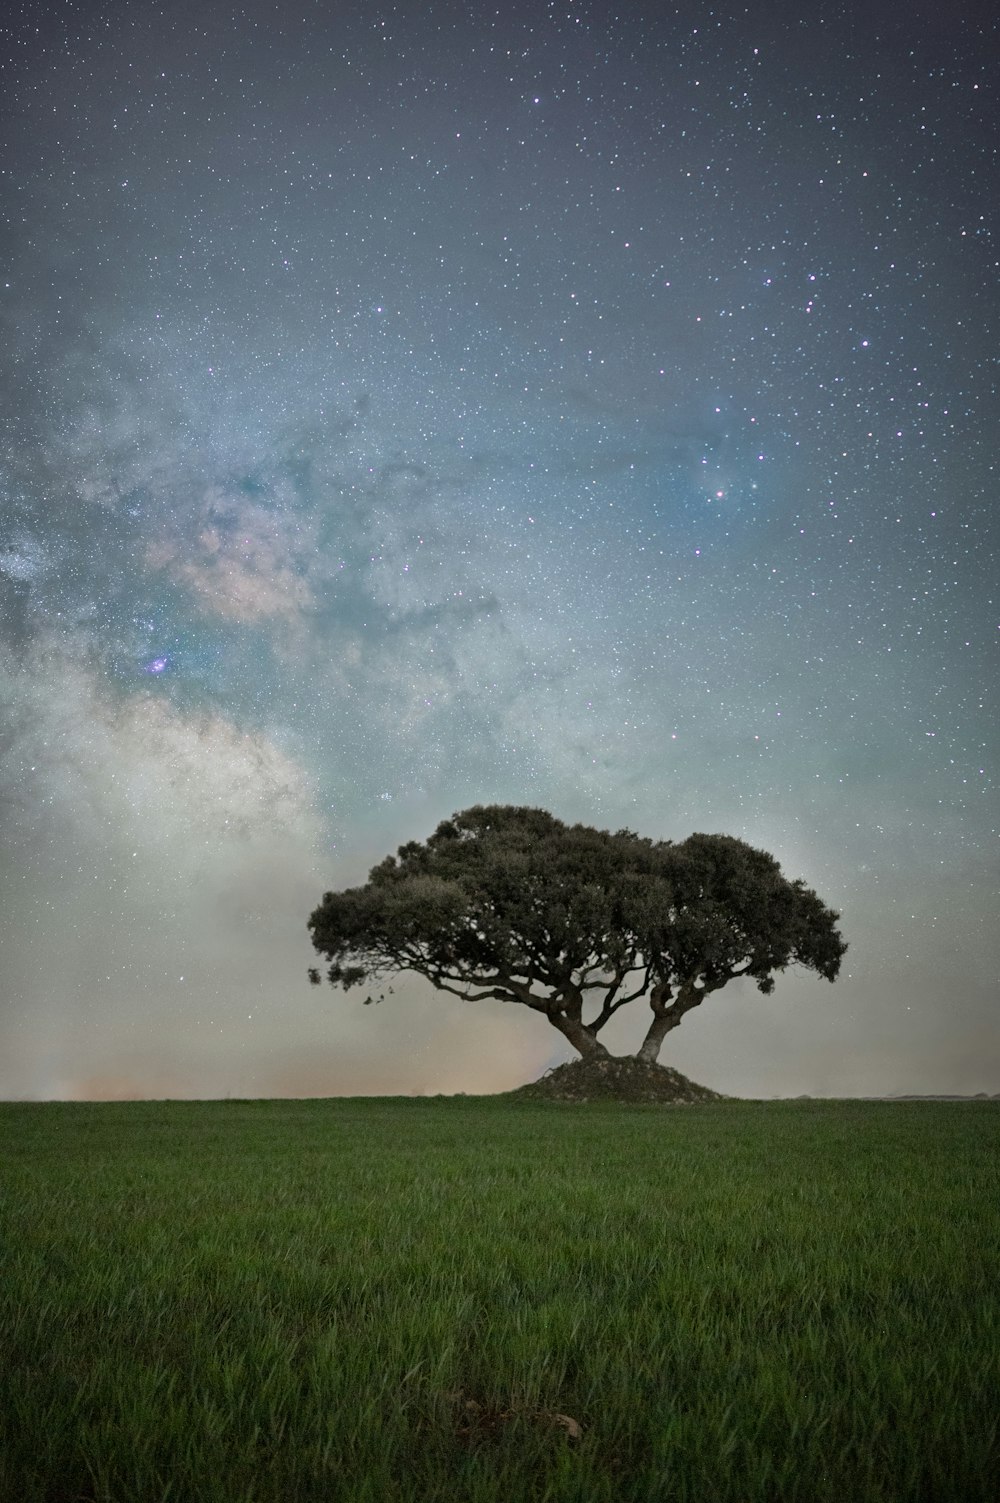 a lone tree in the middle of a field under a night sky filled with stars